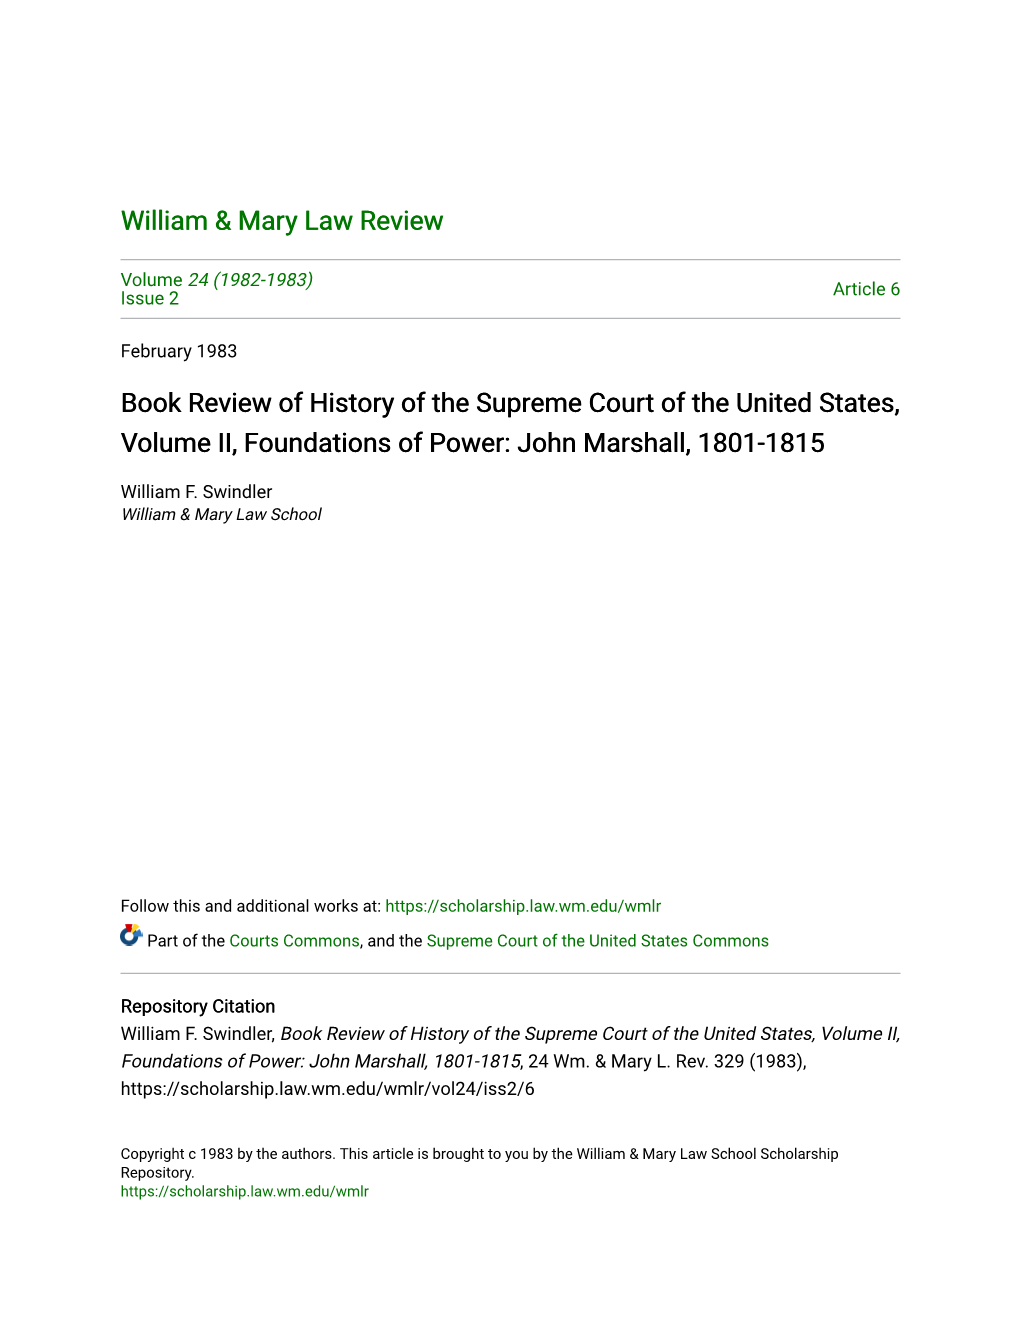 Book Review of History of the Supreme Court of the United States, Volume II, Foundations of Power: John Marshall, 1801-1815